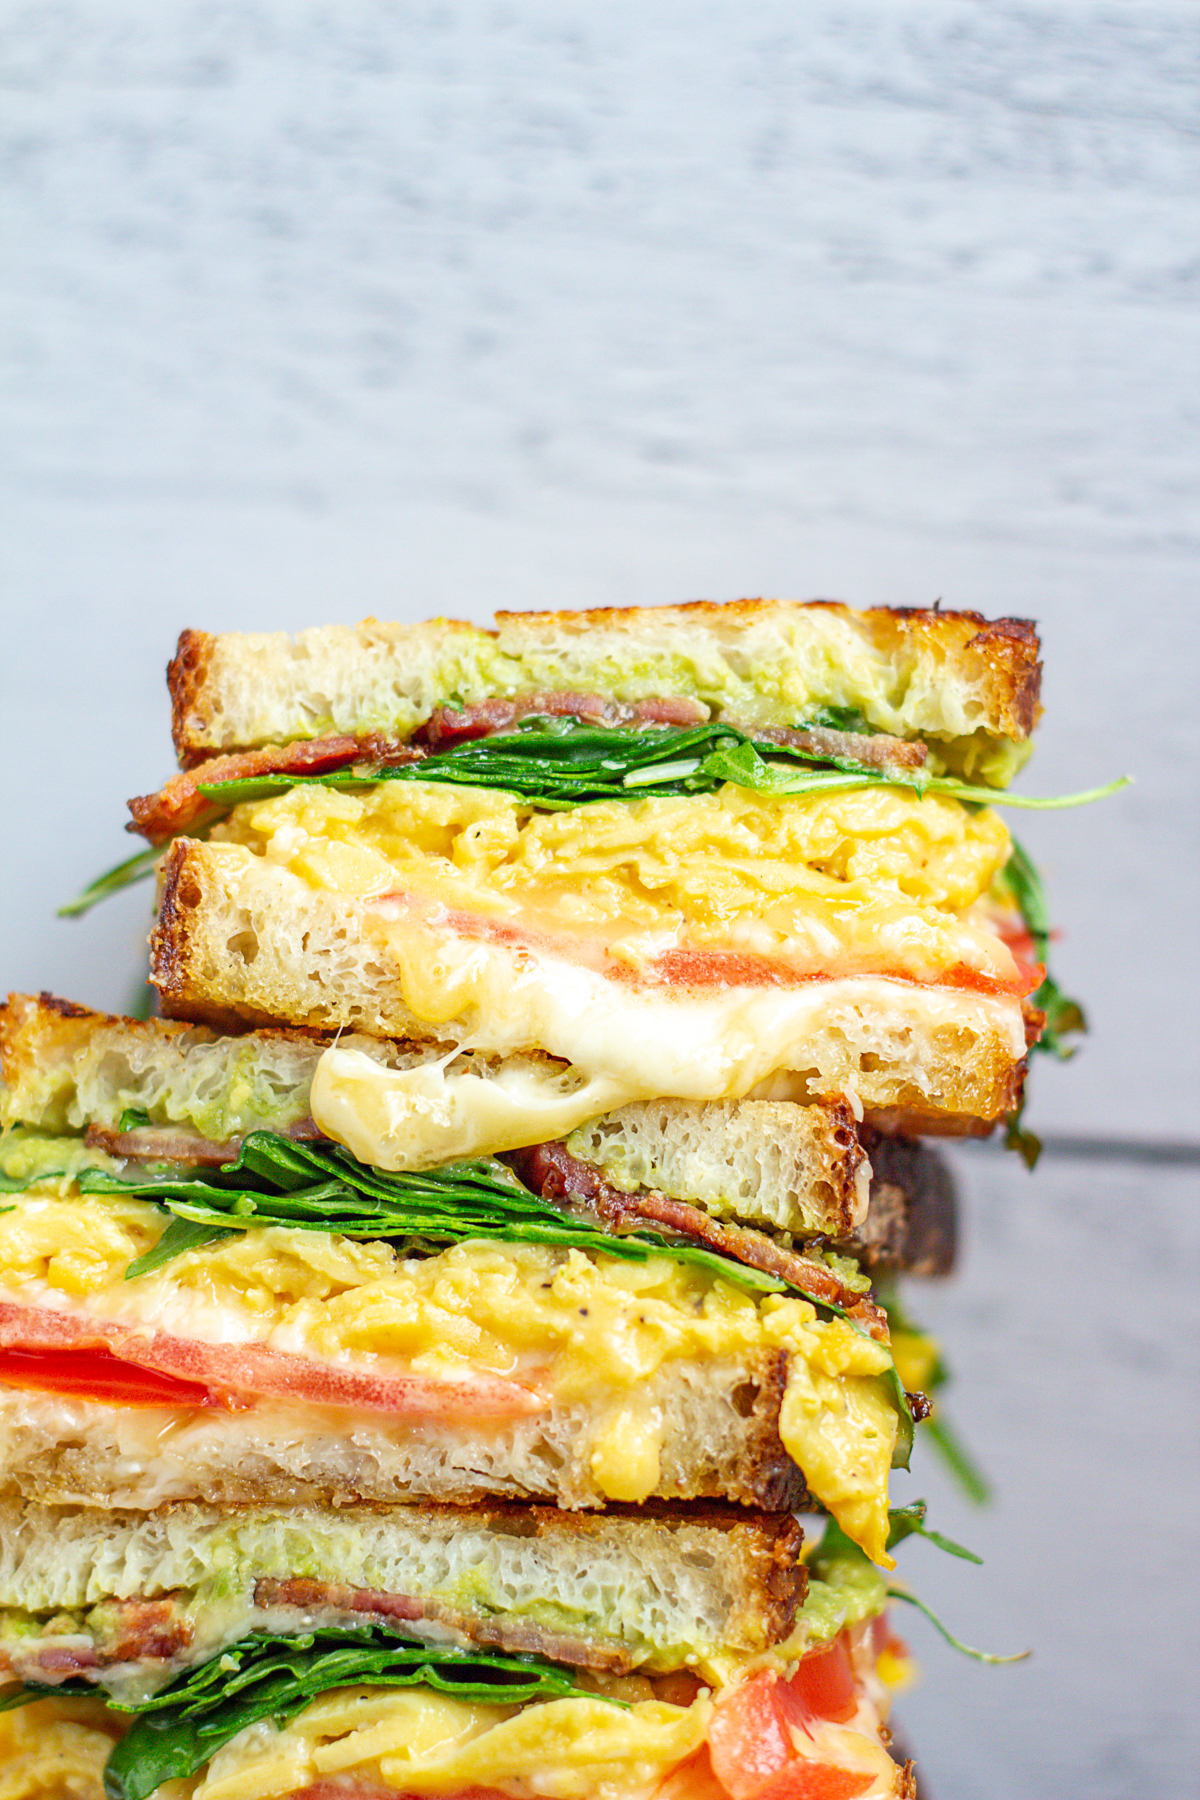 Scrambled Egg Grilled Cheese Recipe A Make At Home Brunch